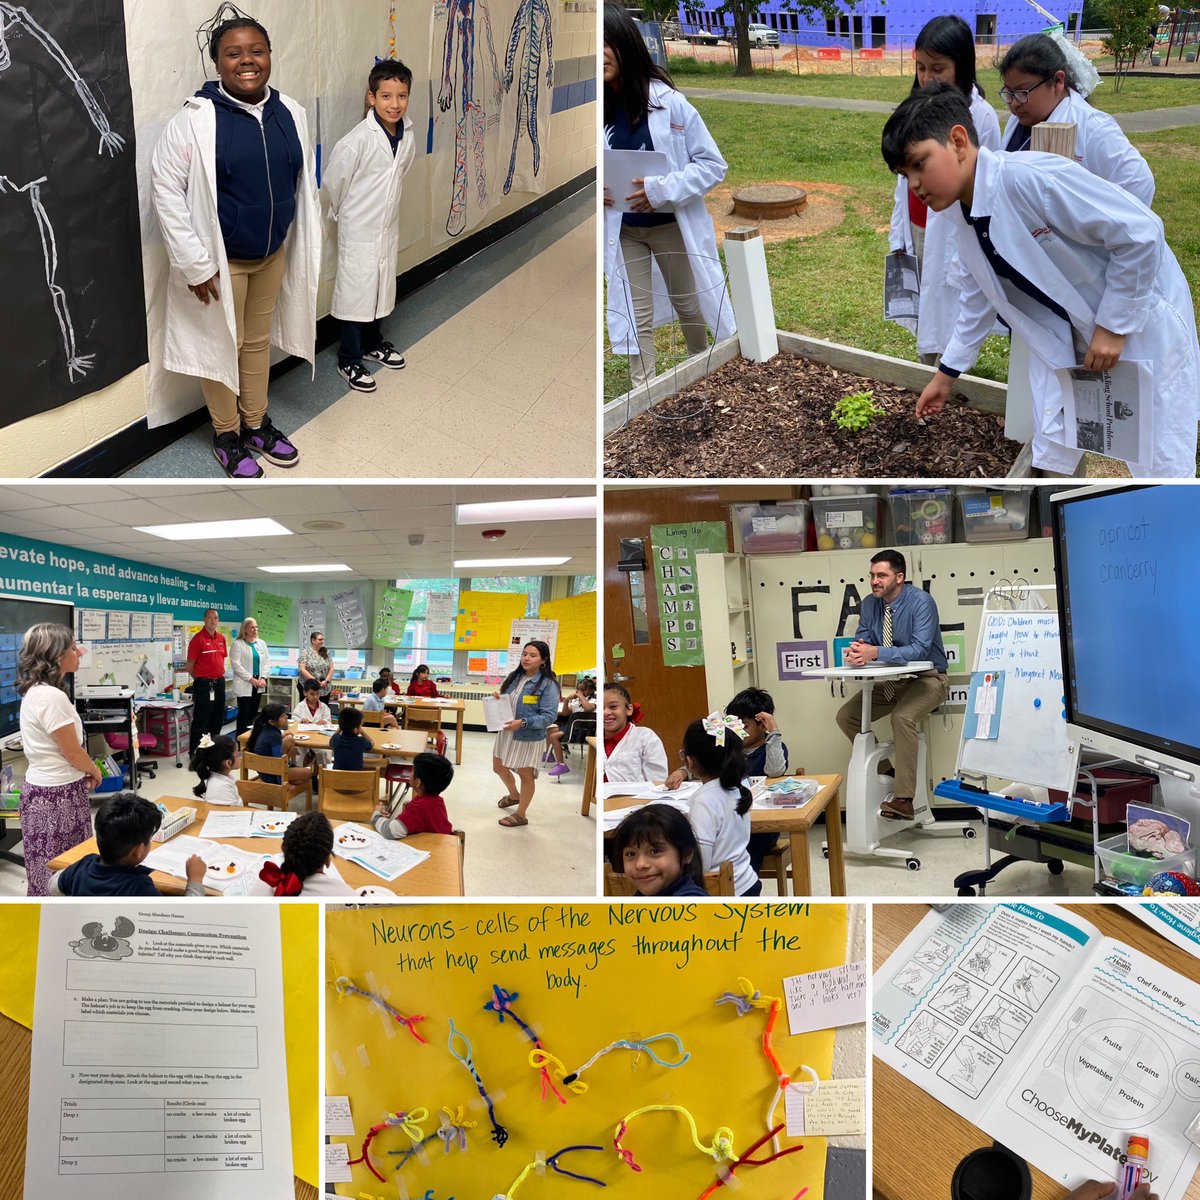 Exceptional visit to Health Sciences Academy @EastESNC! 2nd graders exploring senses&nutrition, 4th graders building helmets to prevent concussions, Ambassador-led garden visit, topped off by student shout-outs! WOW! 👏🏻🤩 #partnership @AtriumHealth @AGHoulihan